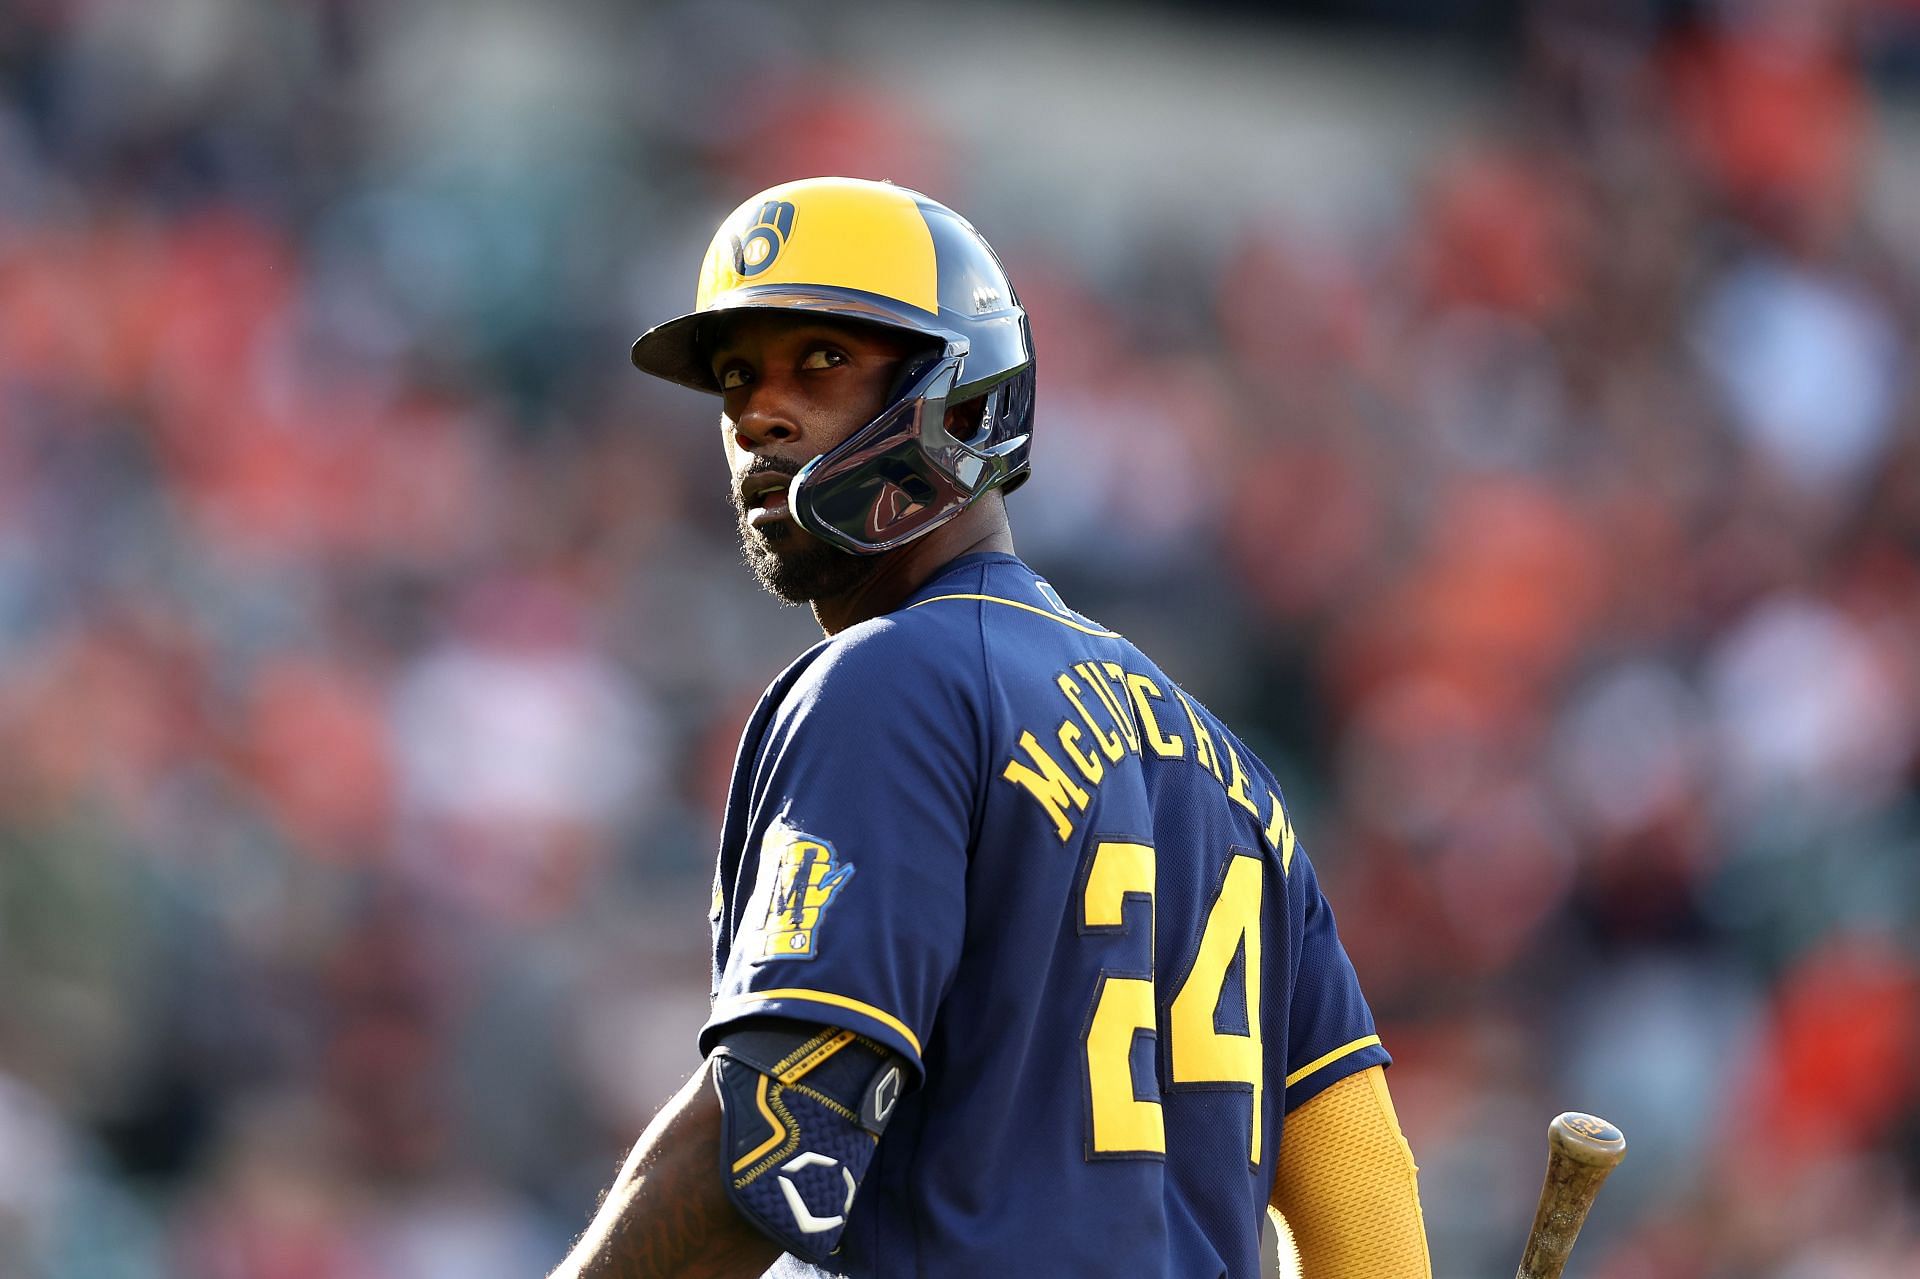 Andrew McCutchen is the most recent player to join the elite club